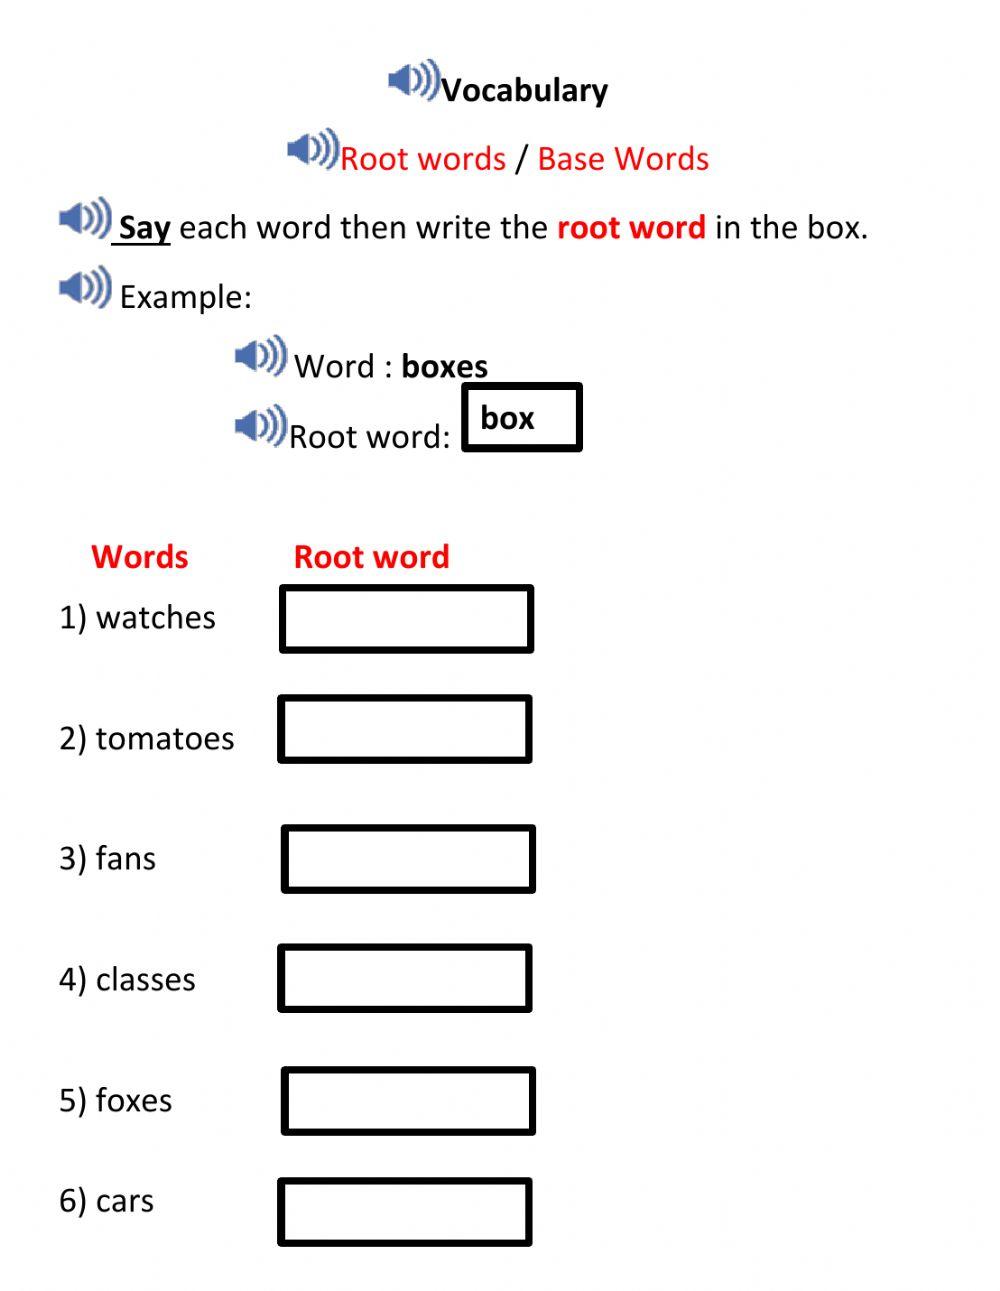 Root words - Base words